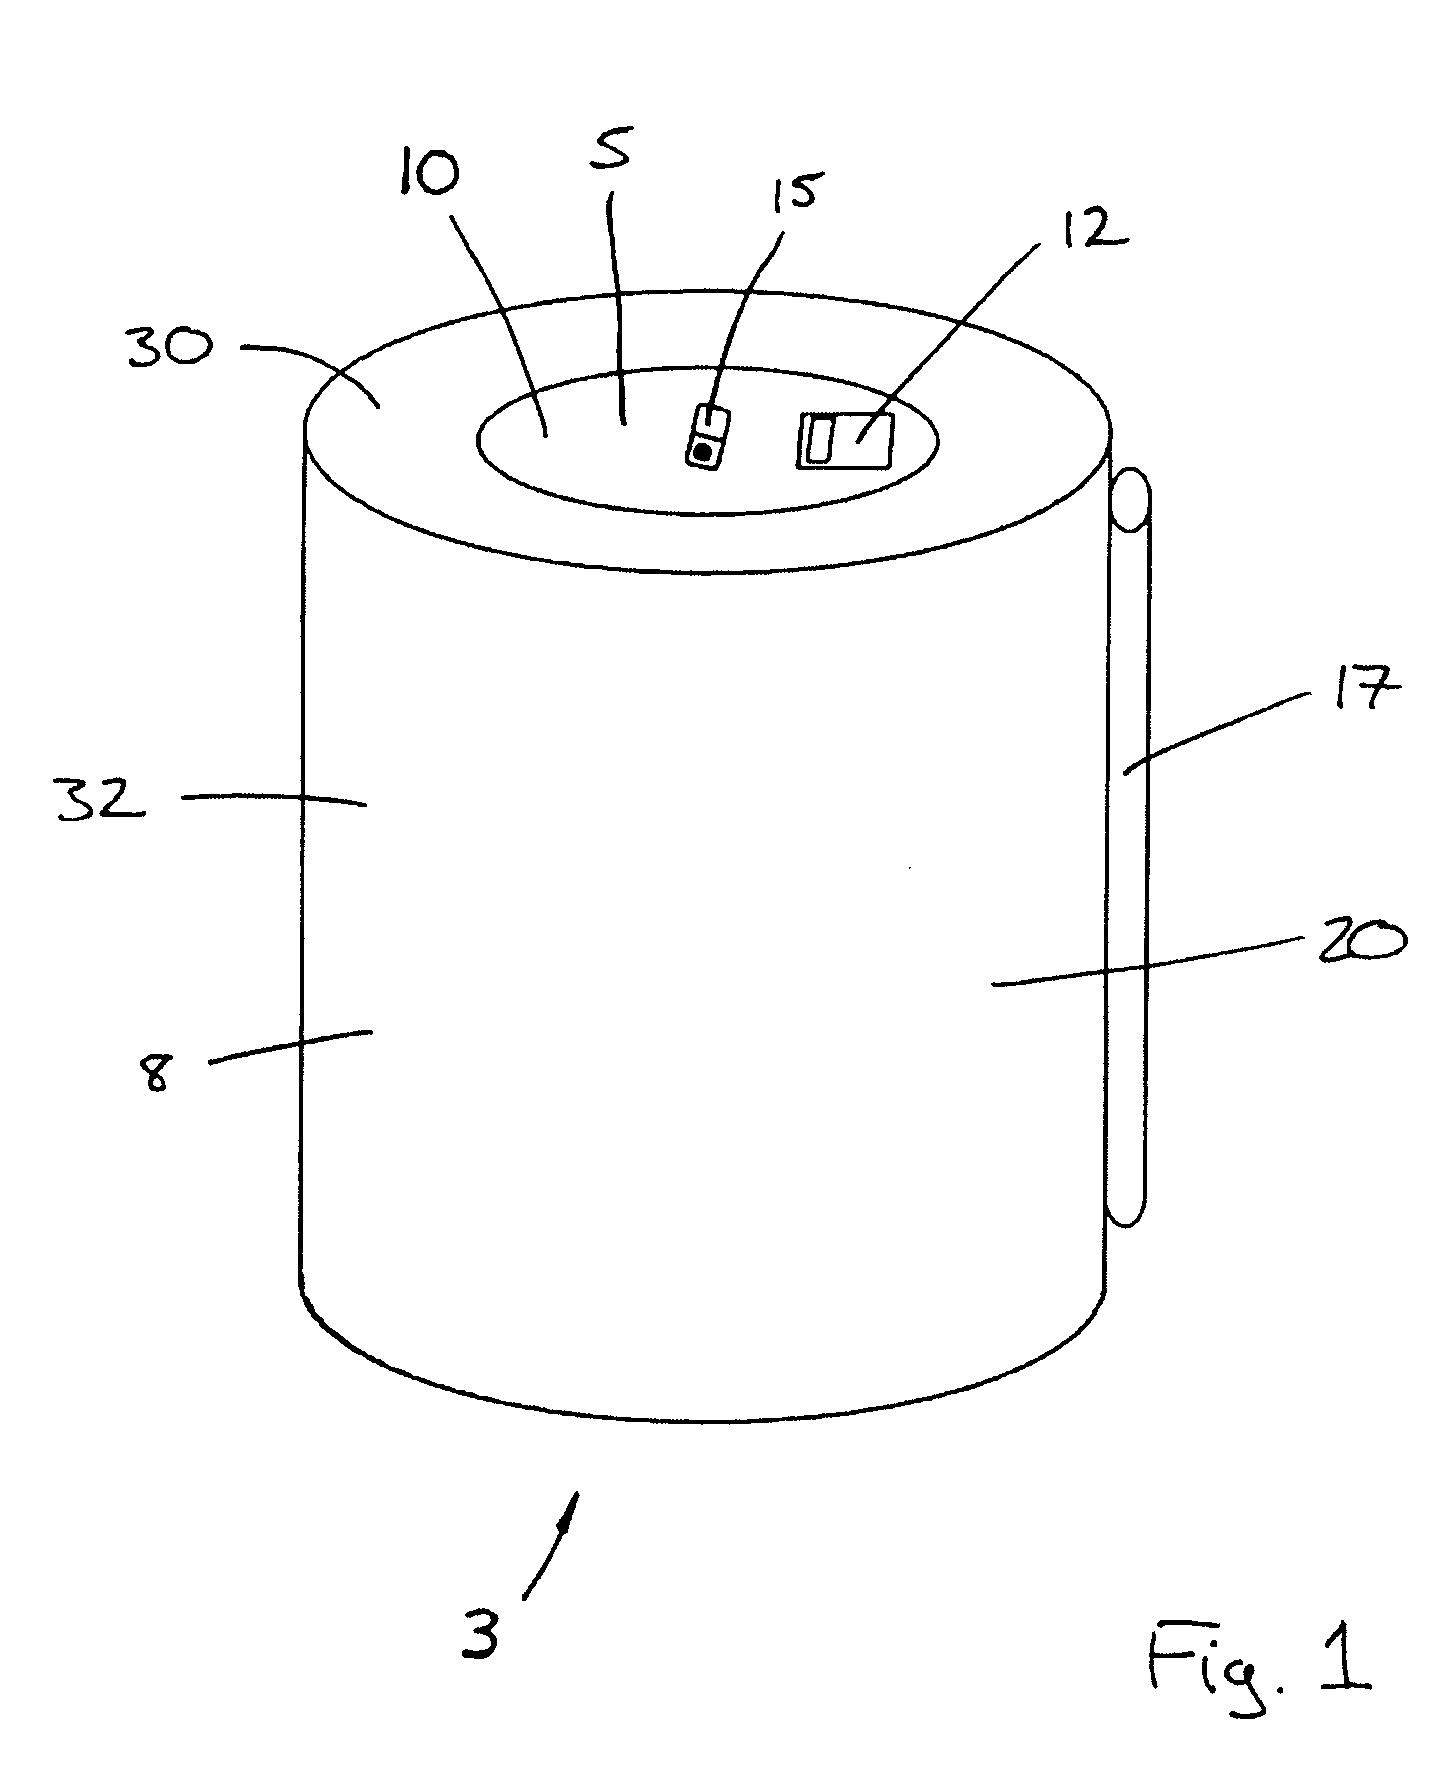 Self-contained temperature-change container assemblies